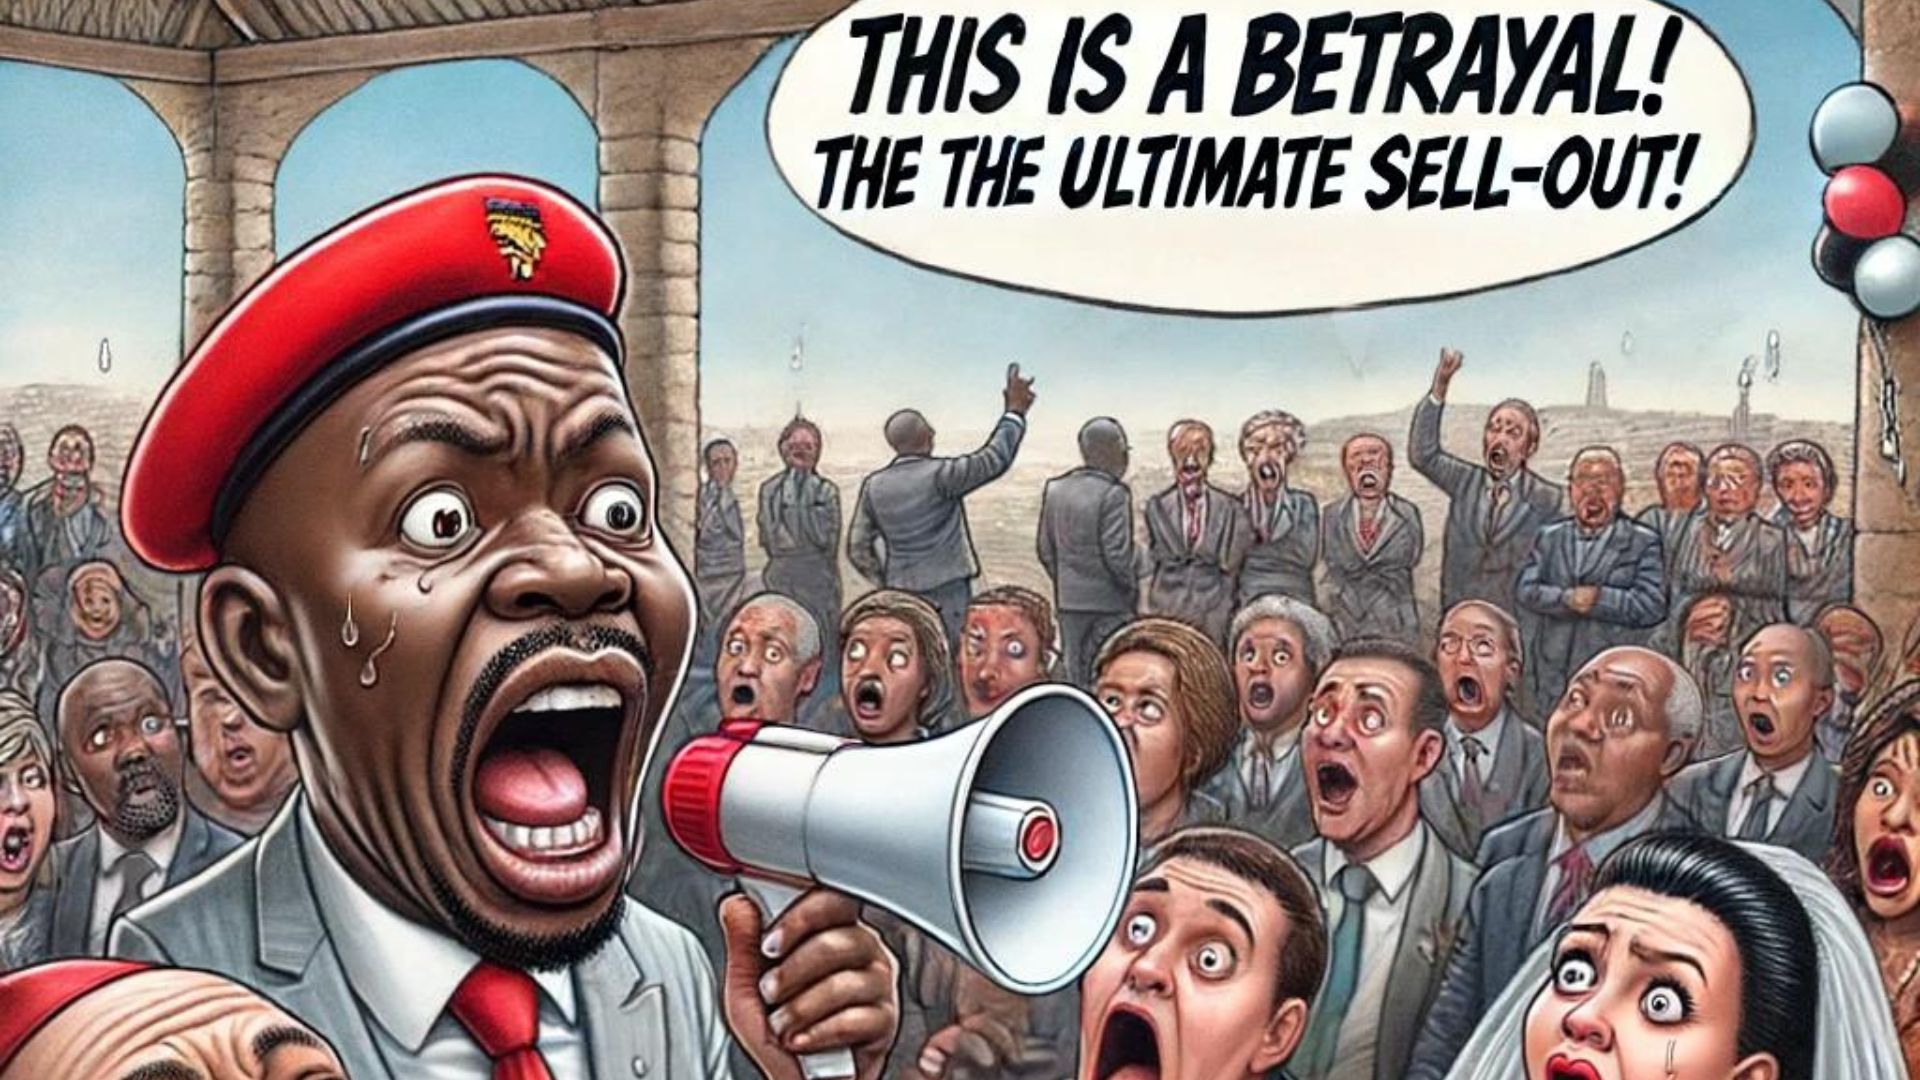 🎤😱 'This is a betrayal! The ultimate sell-out!' Julius Malema crashes the 'wedding' of ANC and DA in this hilarious cartoon. Check out 'The Wedding Crashers'! #SouthAfrica #ANC #DA #JuliusMalema #PoliticalSatire #TheWeddingCrashers